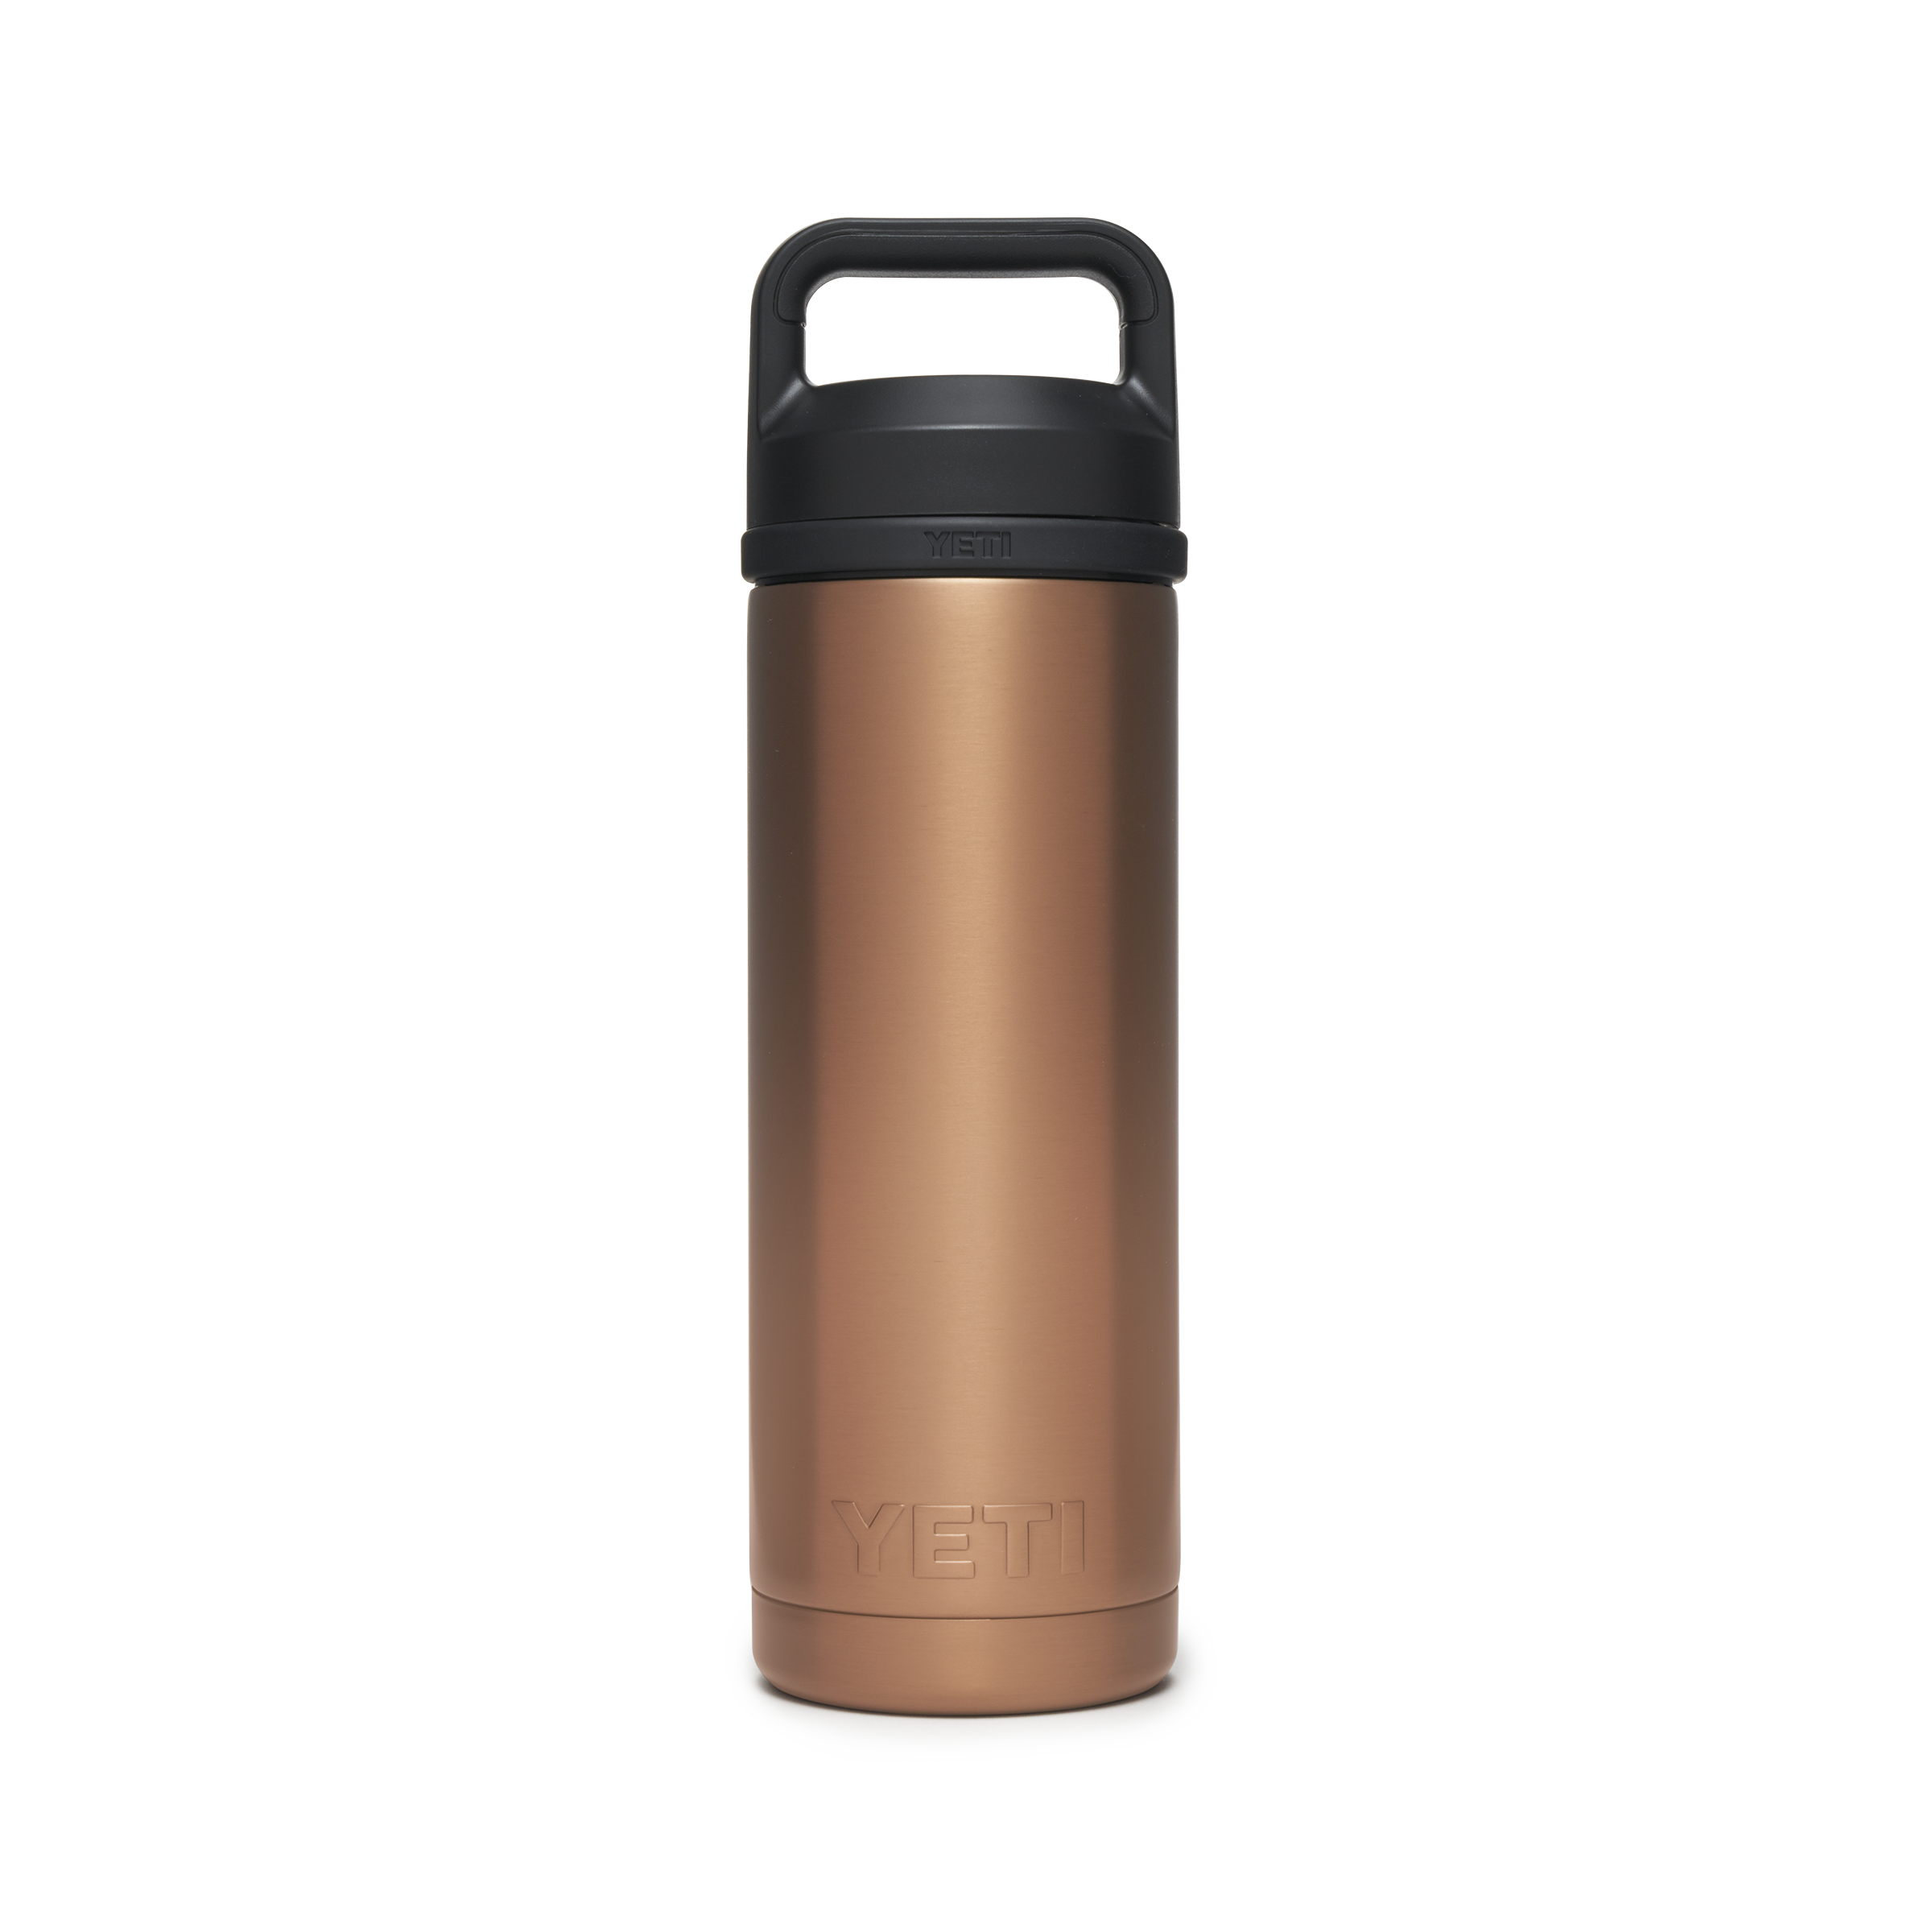 Pricing And Info For Copper And Graphite Yetis : r/YetiCoolers